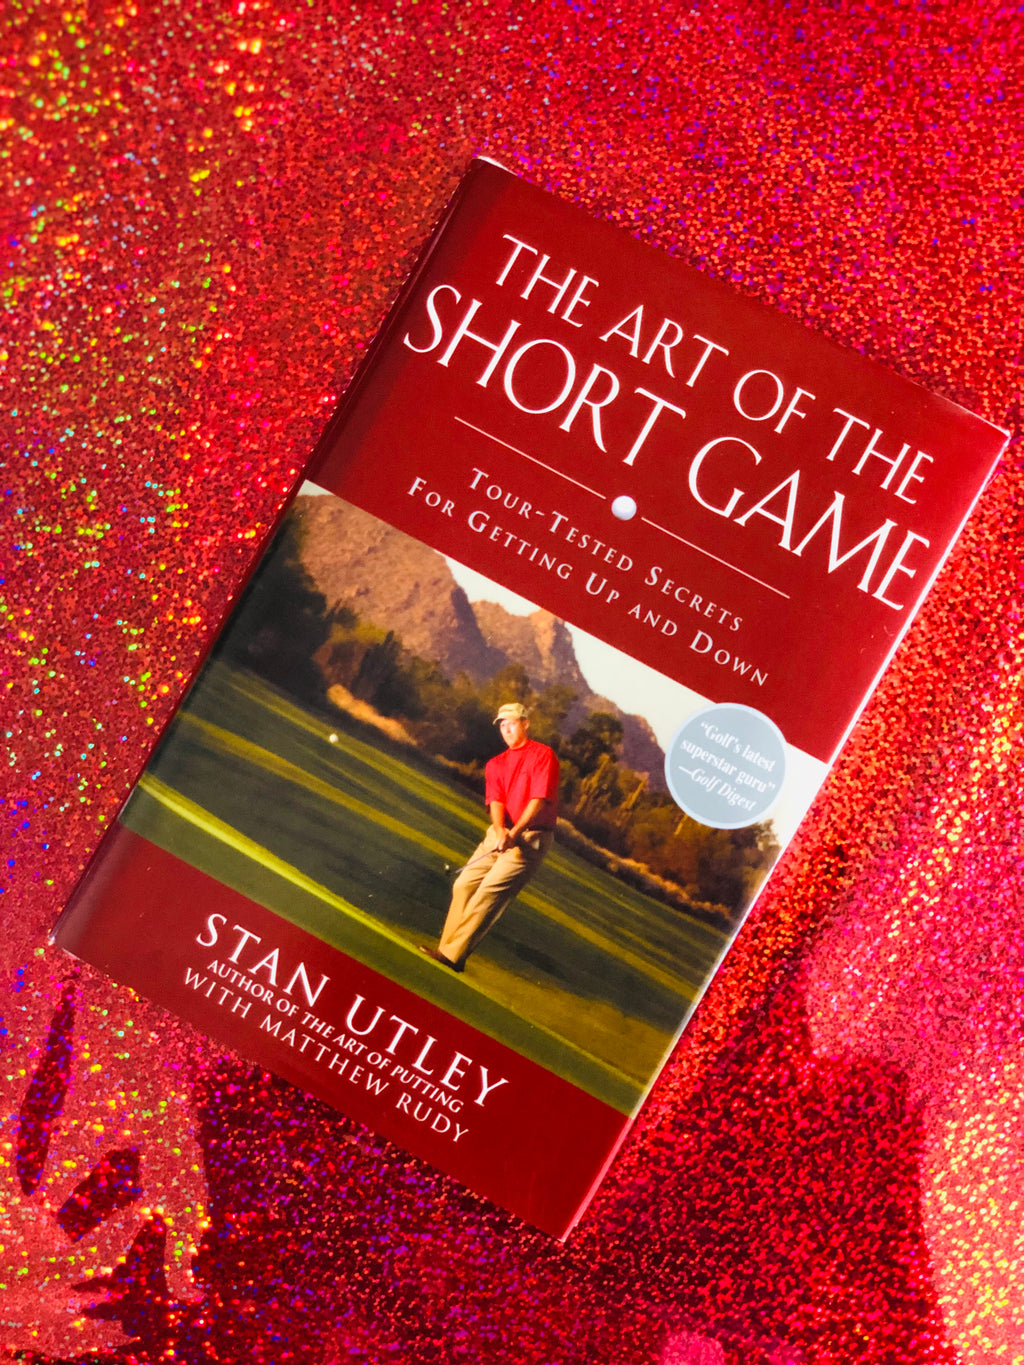 The Art Of The Short Game by Stan Utley